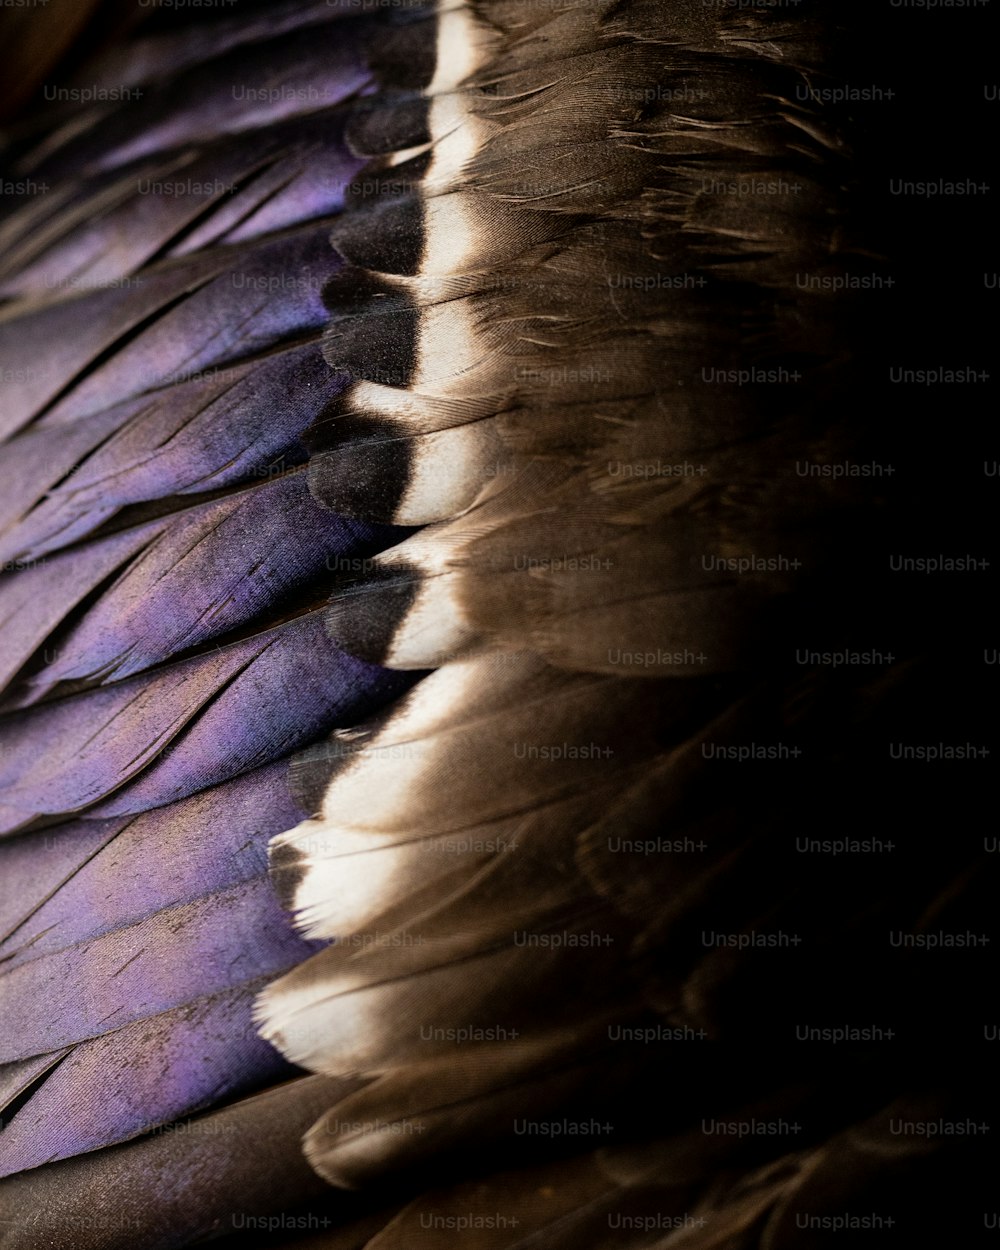 the feathers of a bird are purple and white